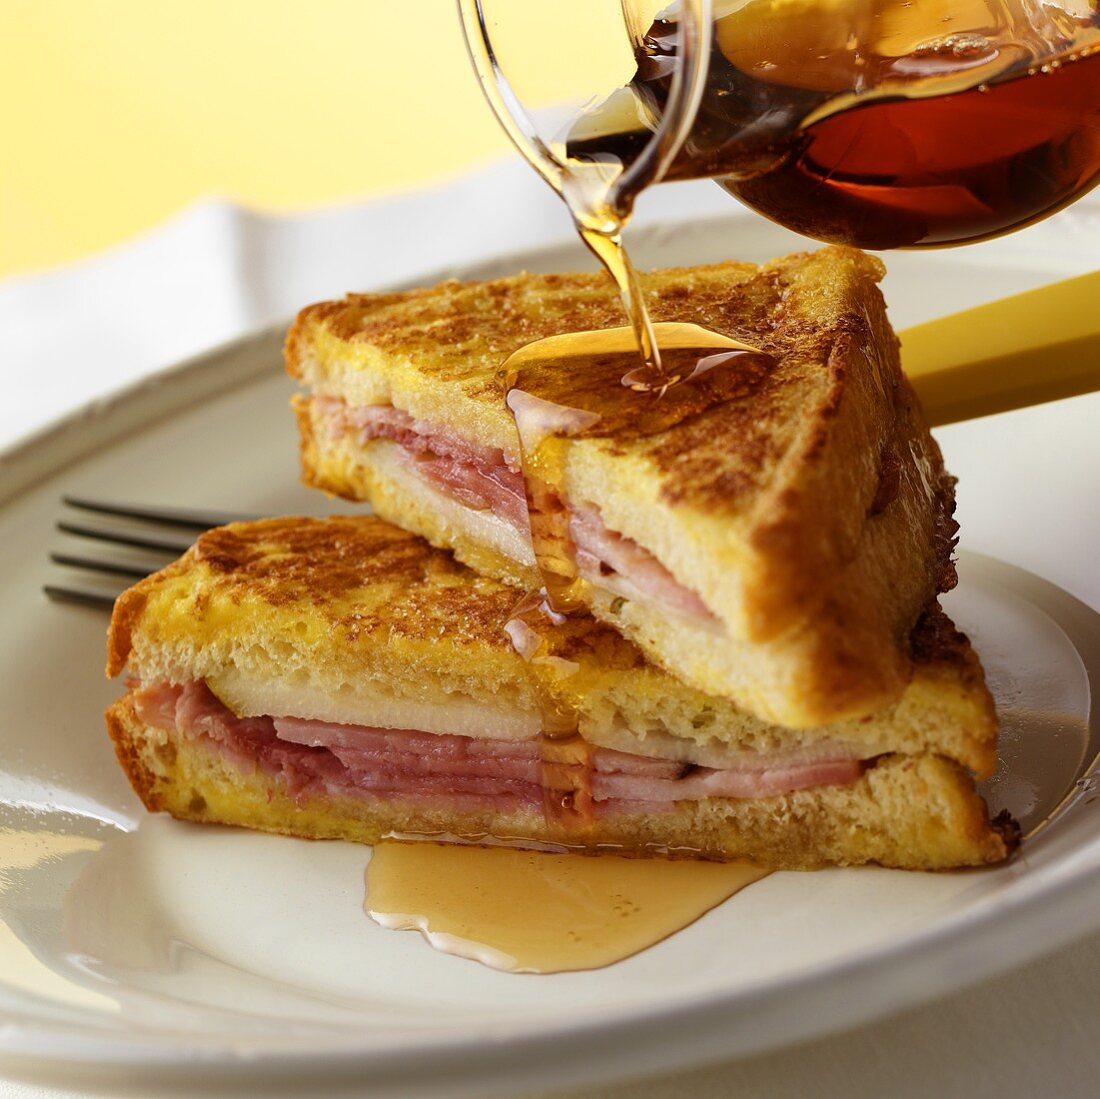 Pouring maple syrup over French toast with ham